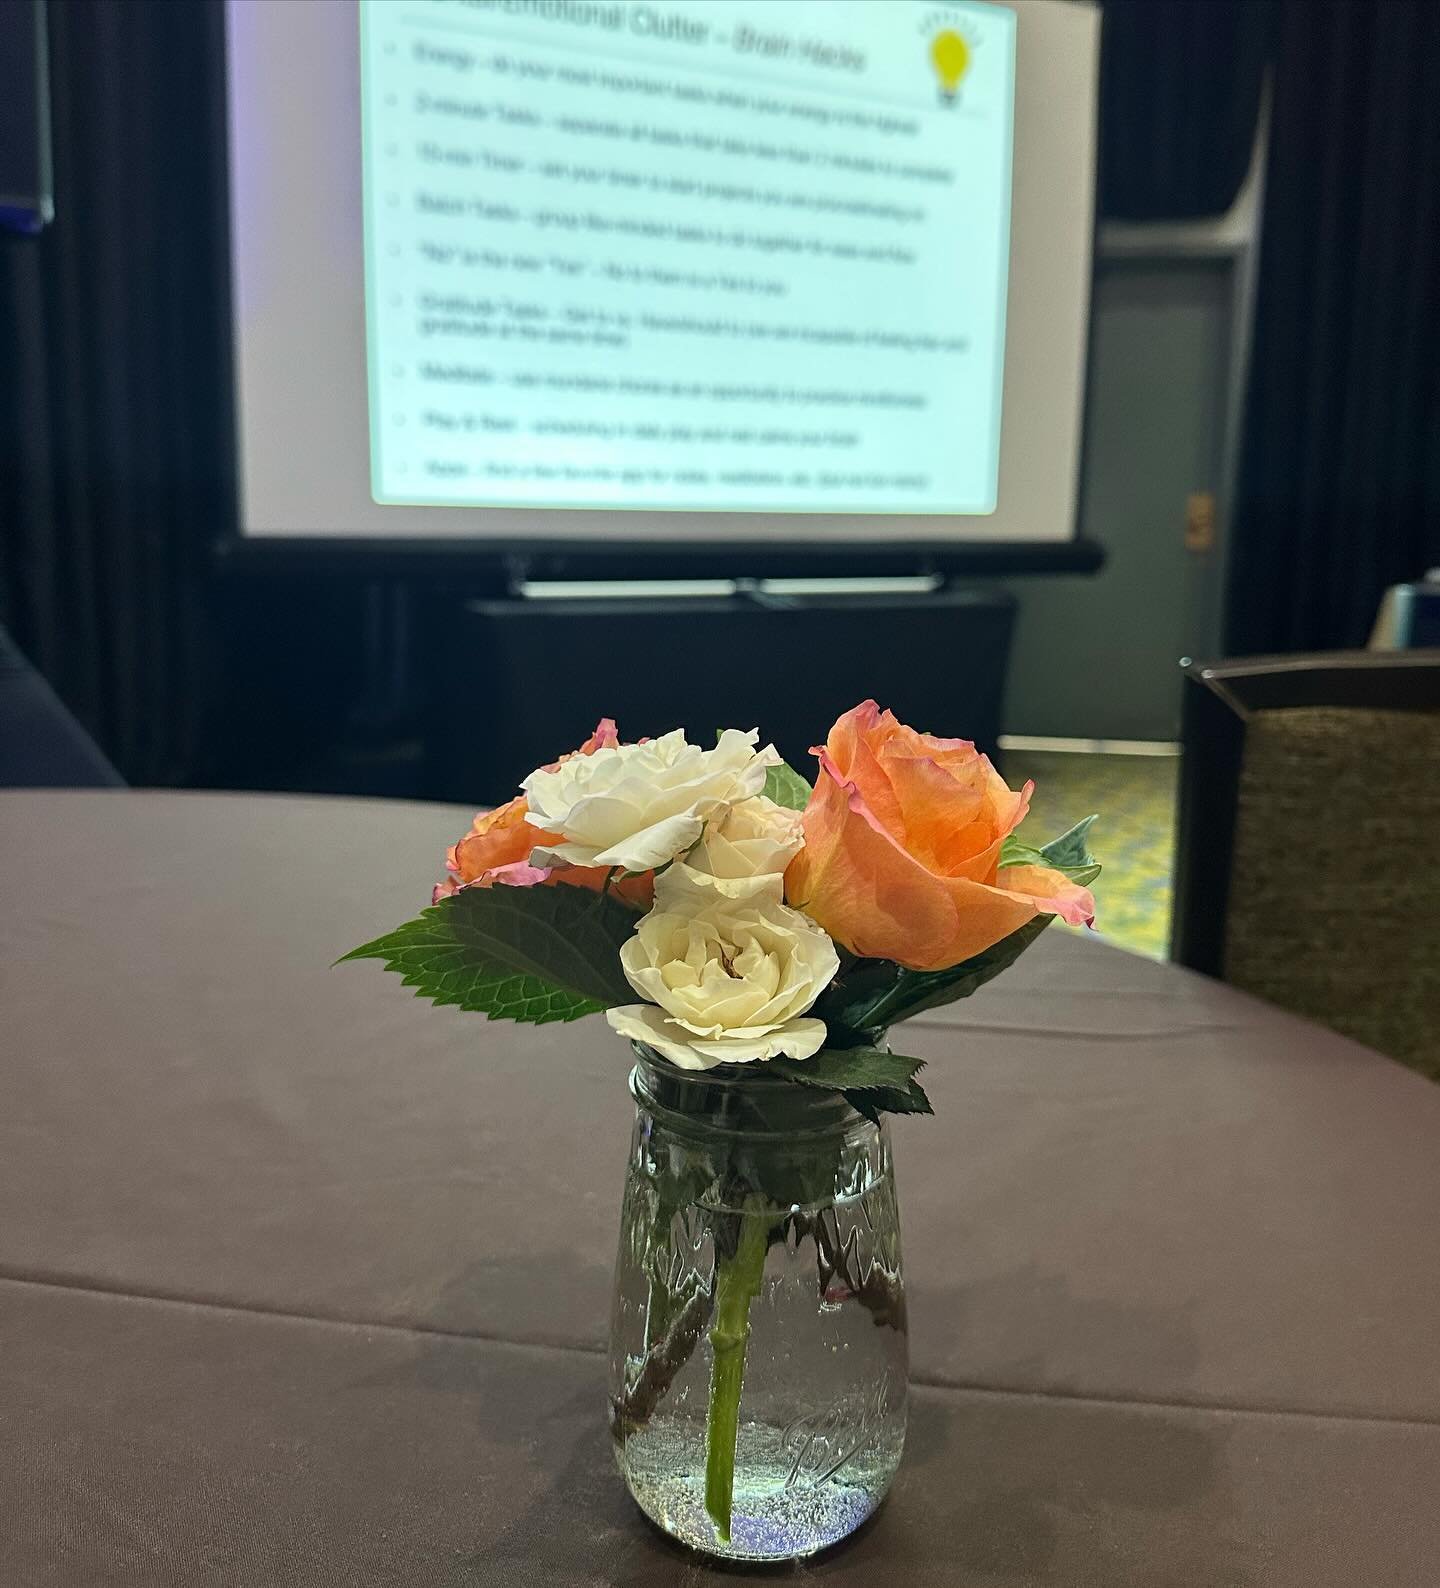 A beautiful bouquet to brighten the Emerald Bay Room at @harveystahoe while our community focuses on &ldquo;overcoming overwhelm&rdquo;. Thank you @bbaconbits for all of your insights and @cospirelaketahoe for bringing us all together and @bonanzaflo